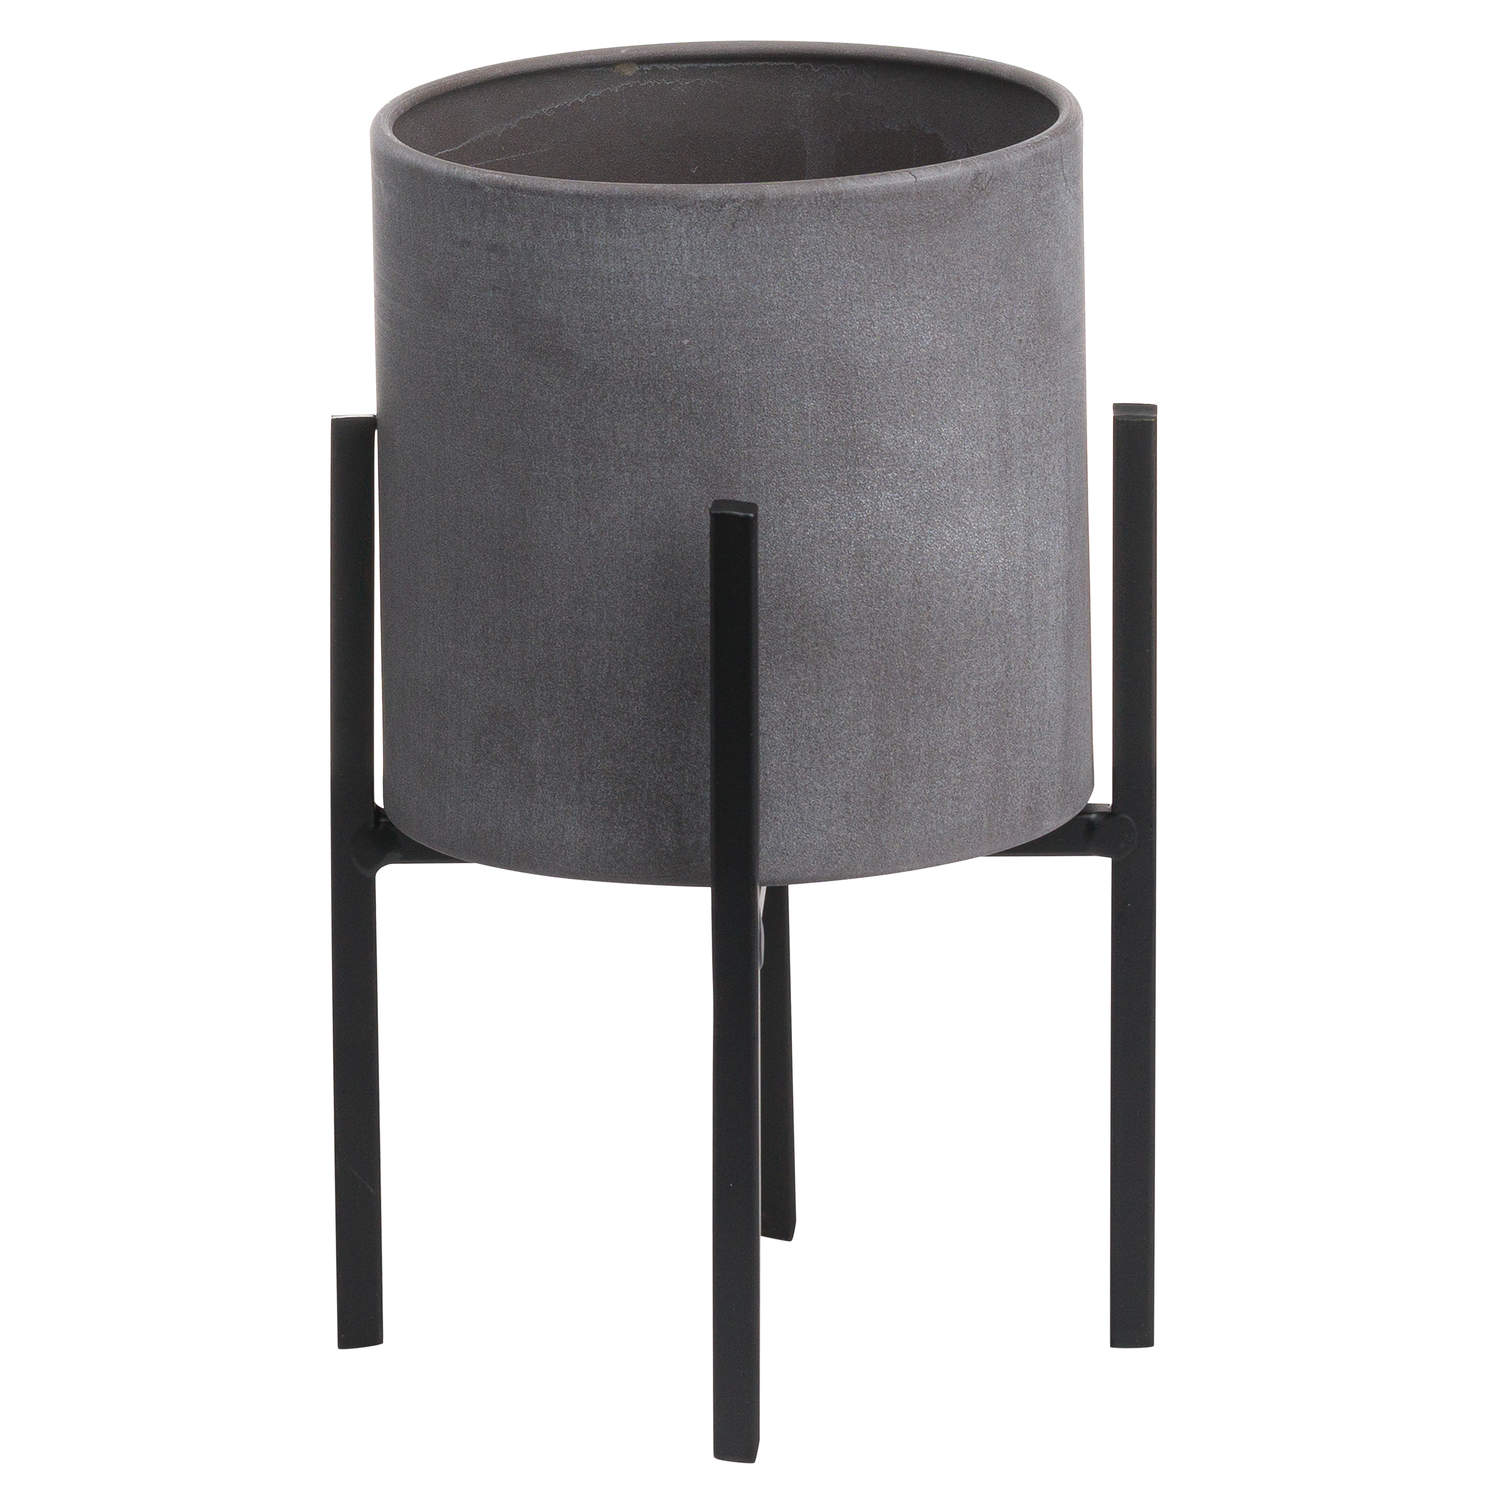 Set Of Two Cylindrical Table Top Planters - Image 3